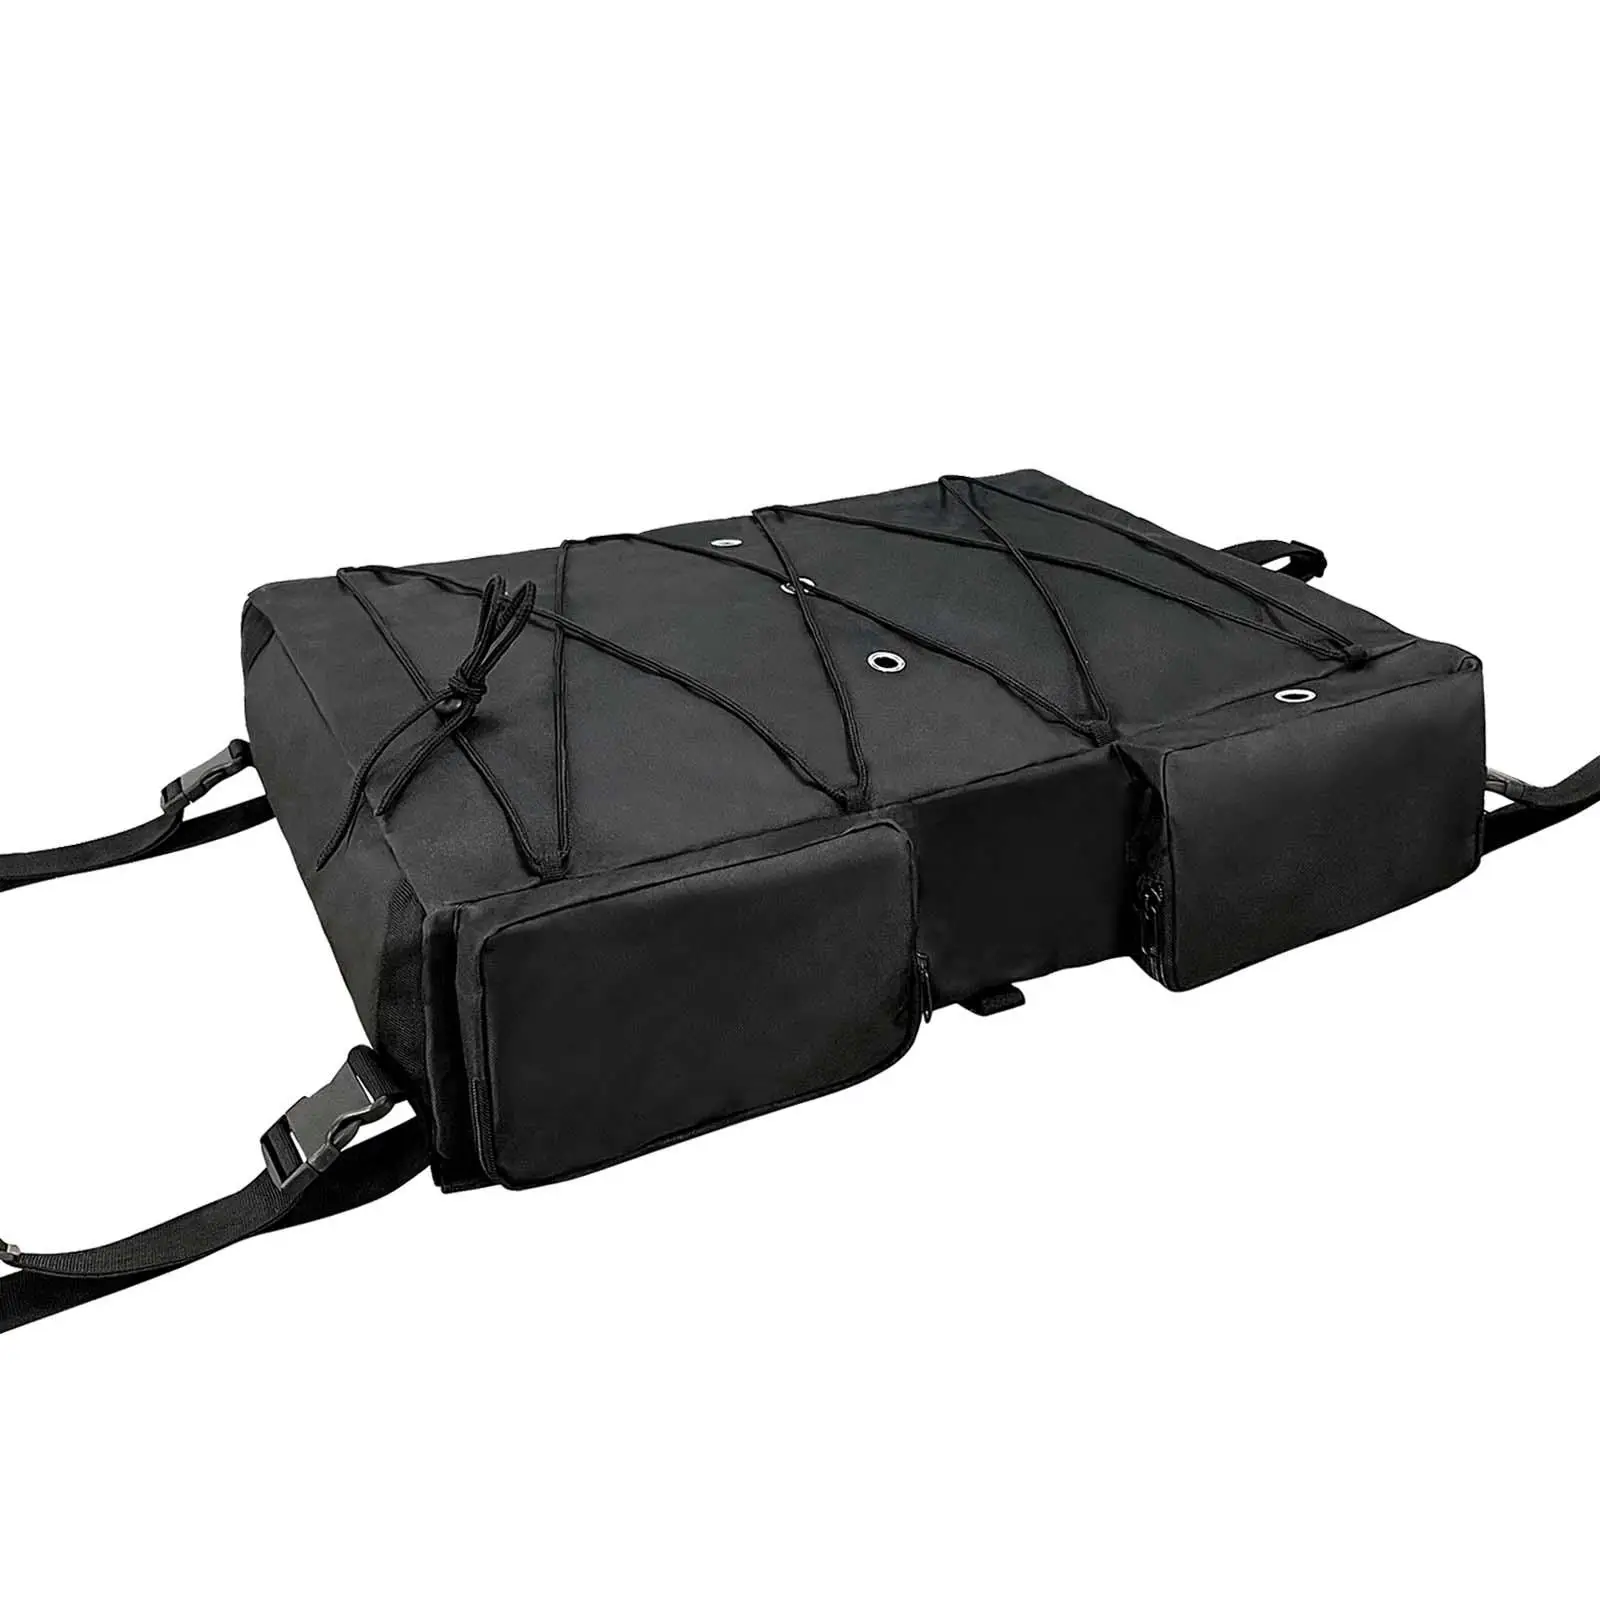 T Bag T Top and Bimini Top Storage Pack T Bag Durable Bimini Top T Top Overhead Storage Bag Packs For T Top Boats Pontoon Tops